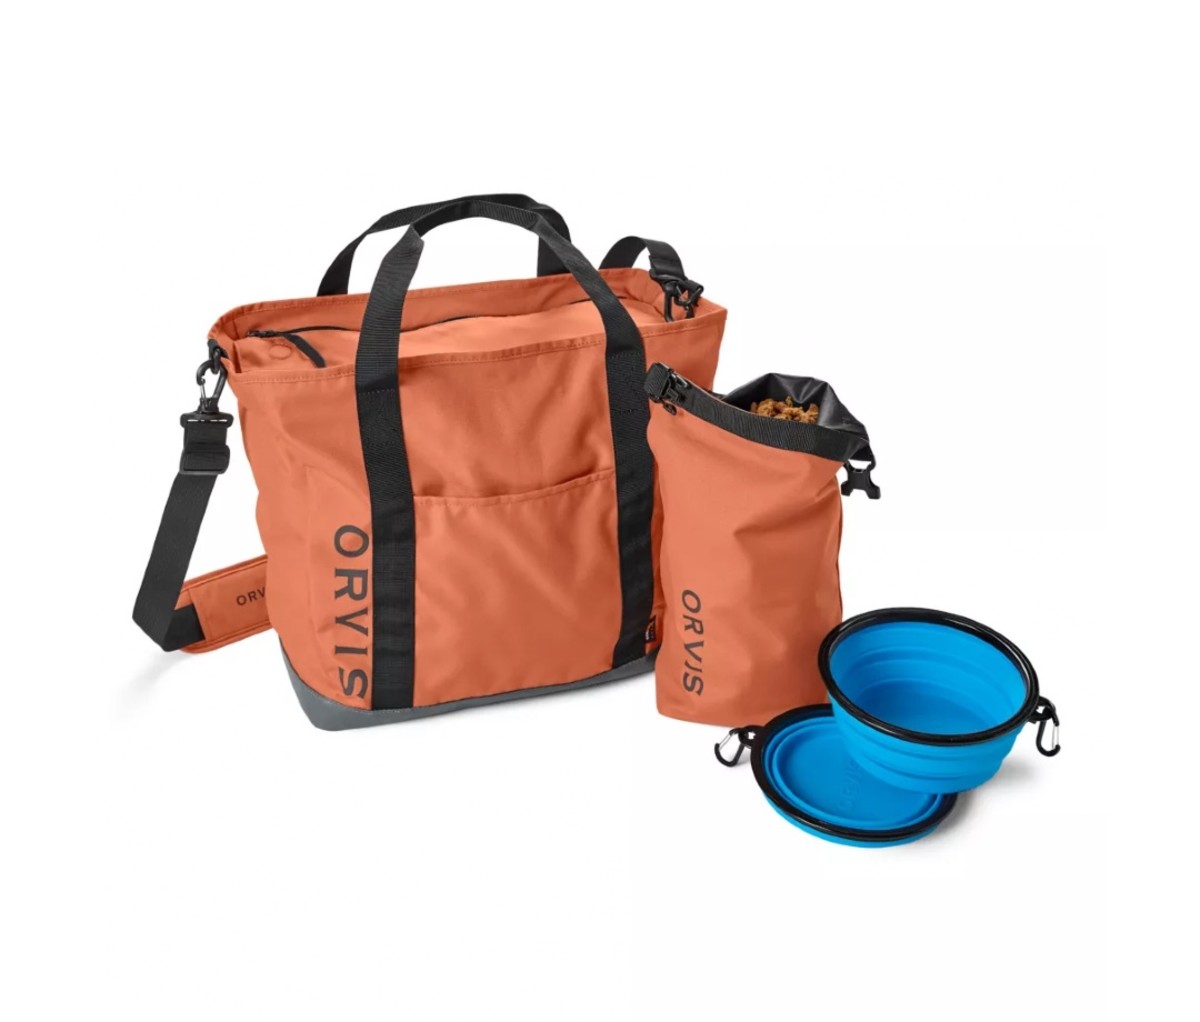 Keep all your dog essentials close at hand with the Orvis Chuckwagon Dog Tote.